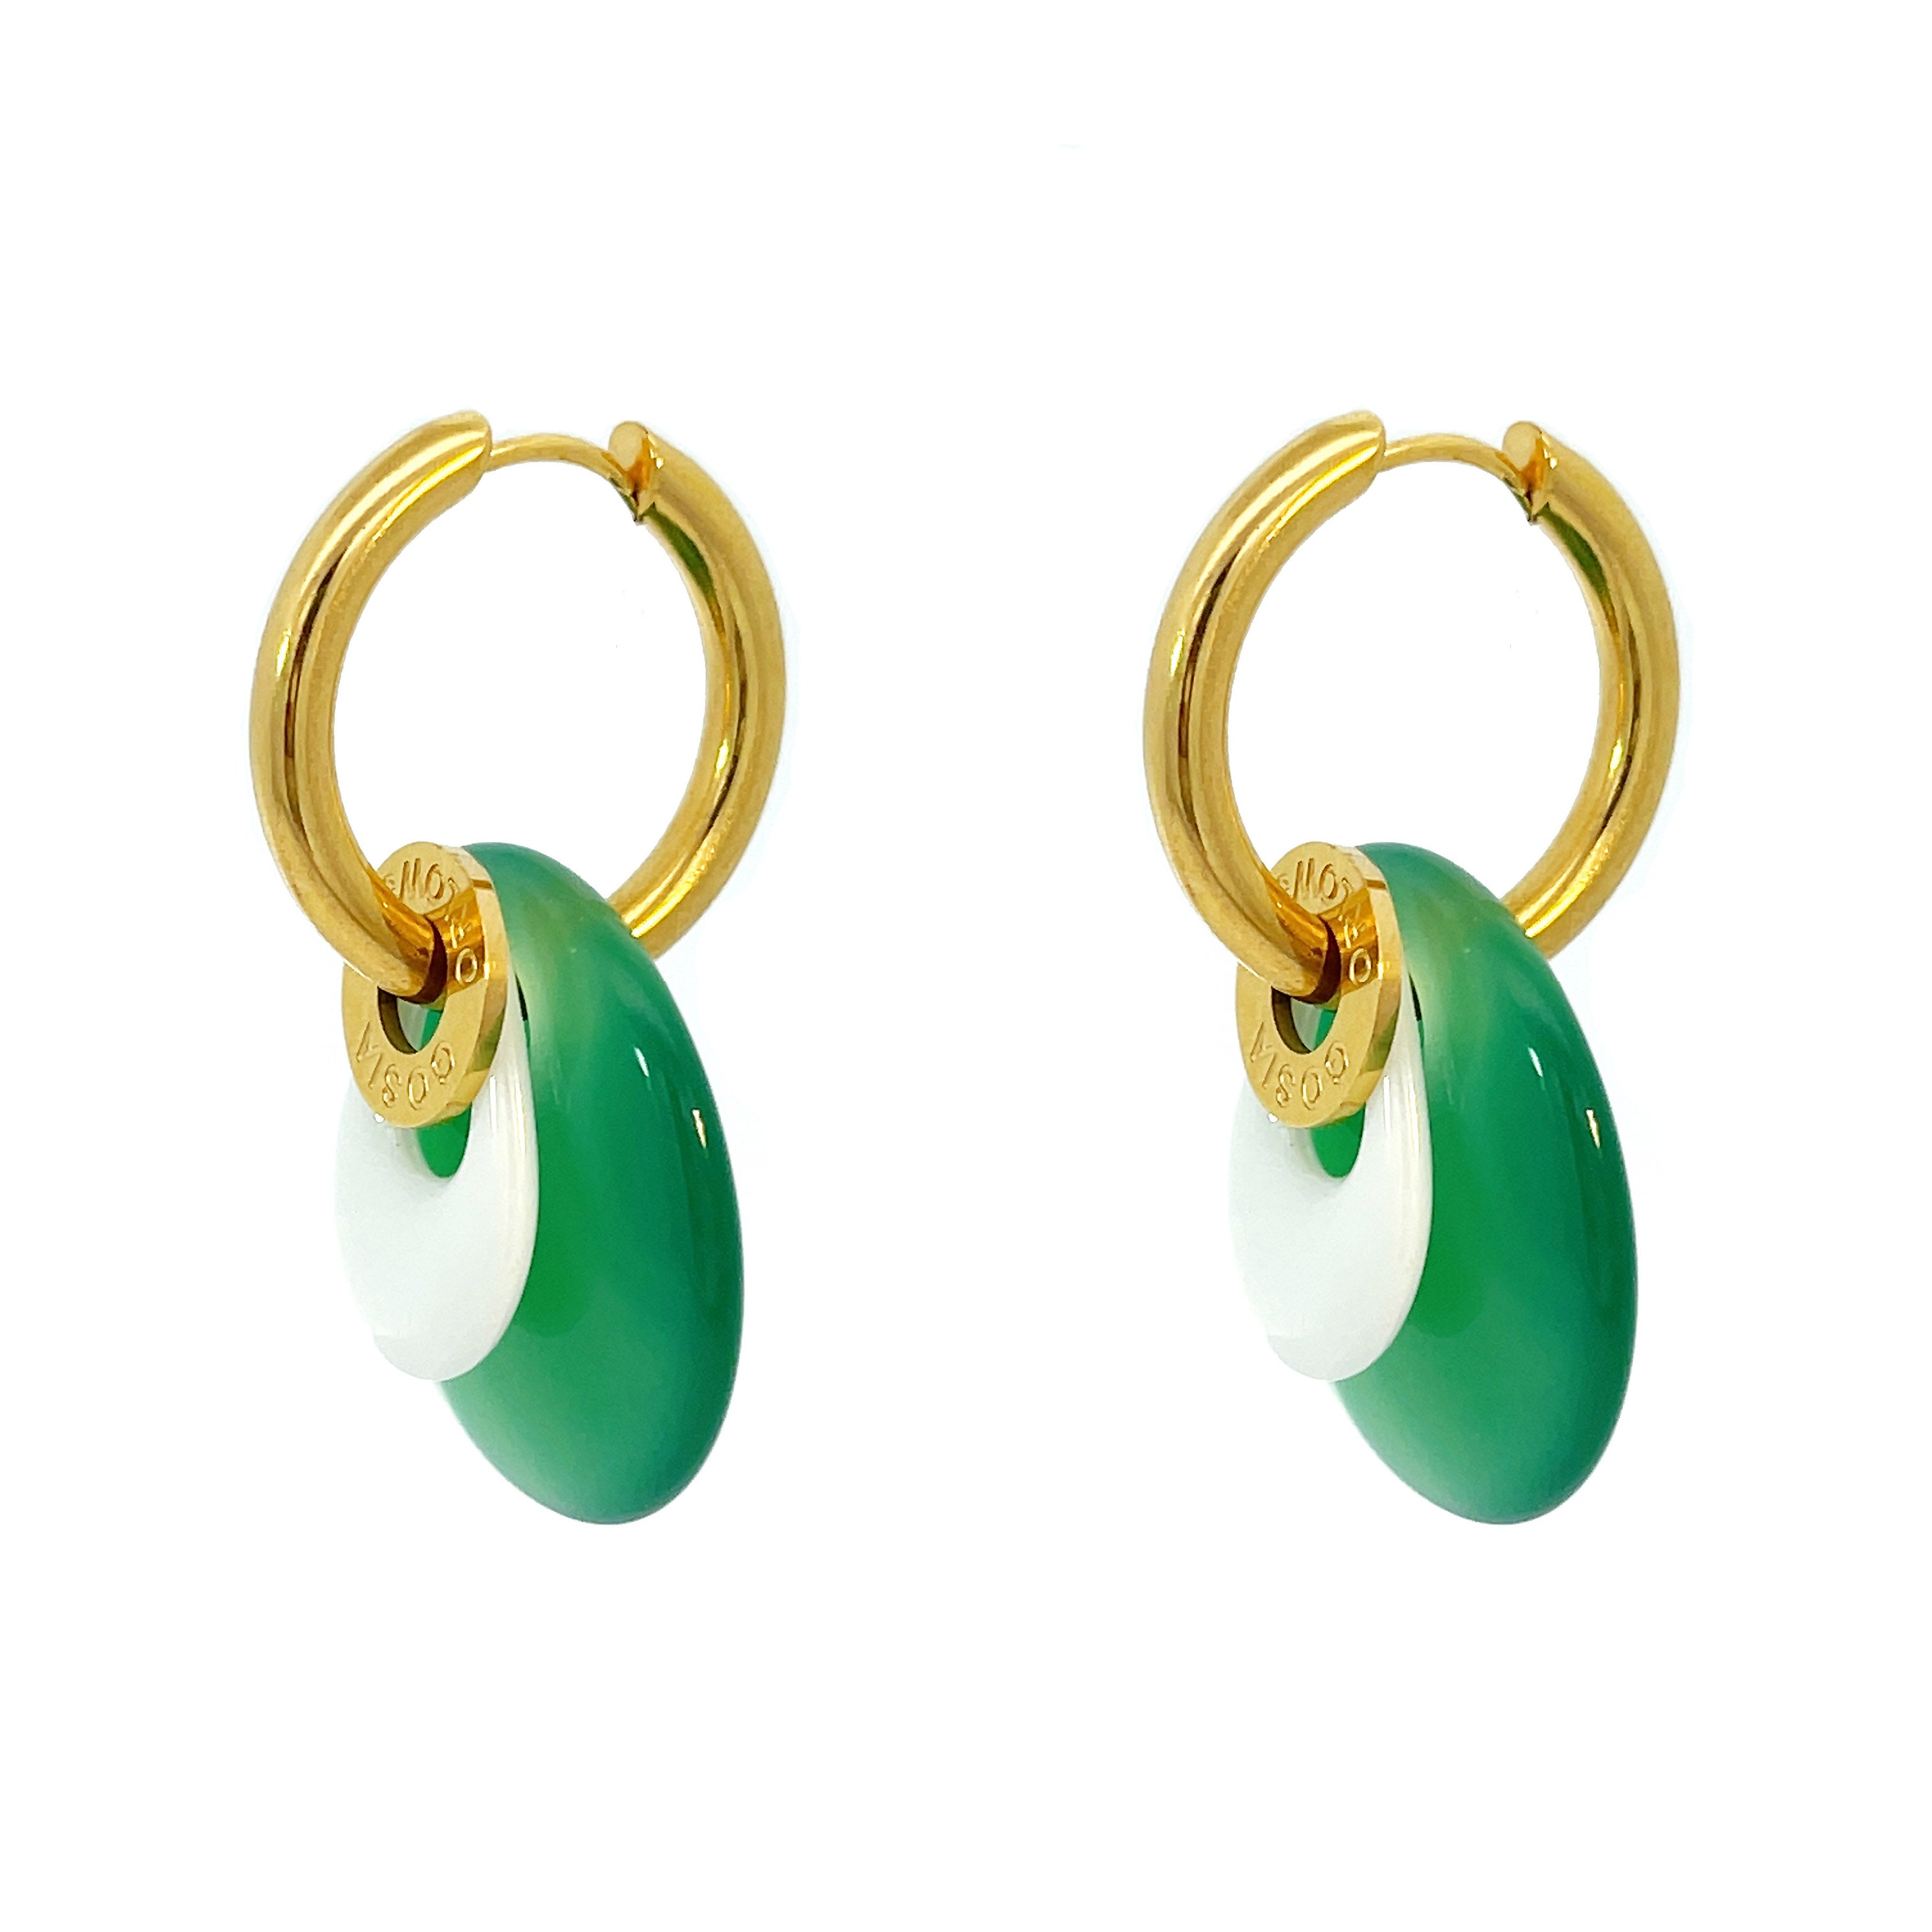 Discover Green & White Earrings from Ciambella Collection